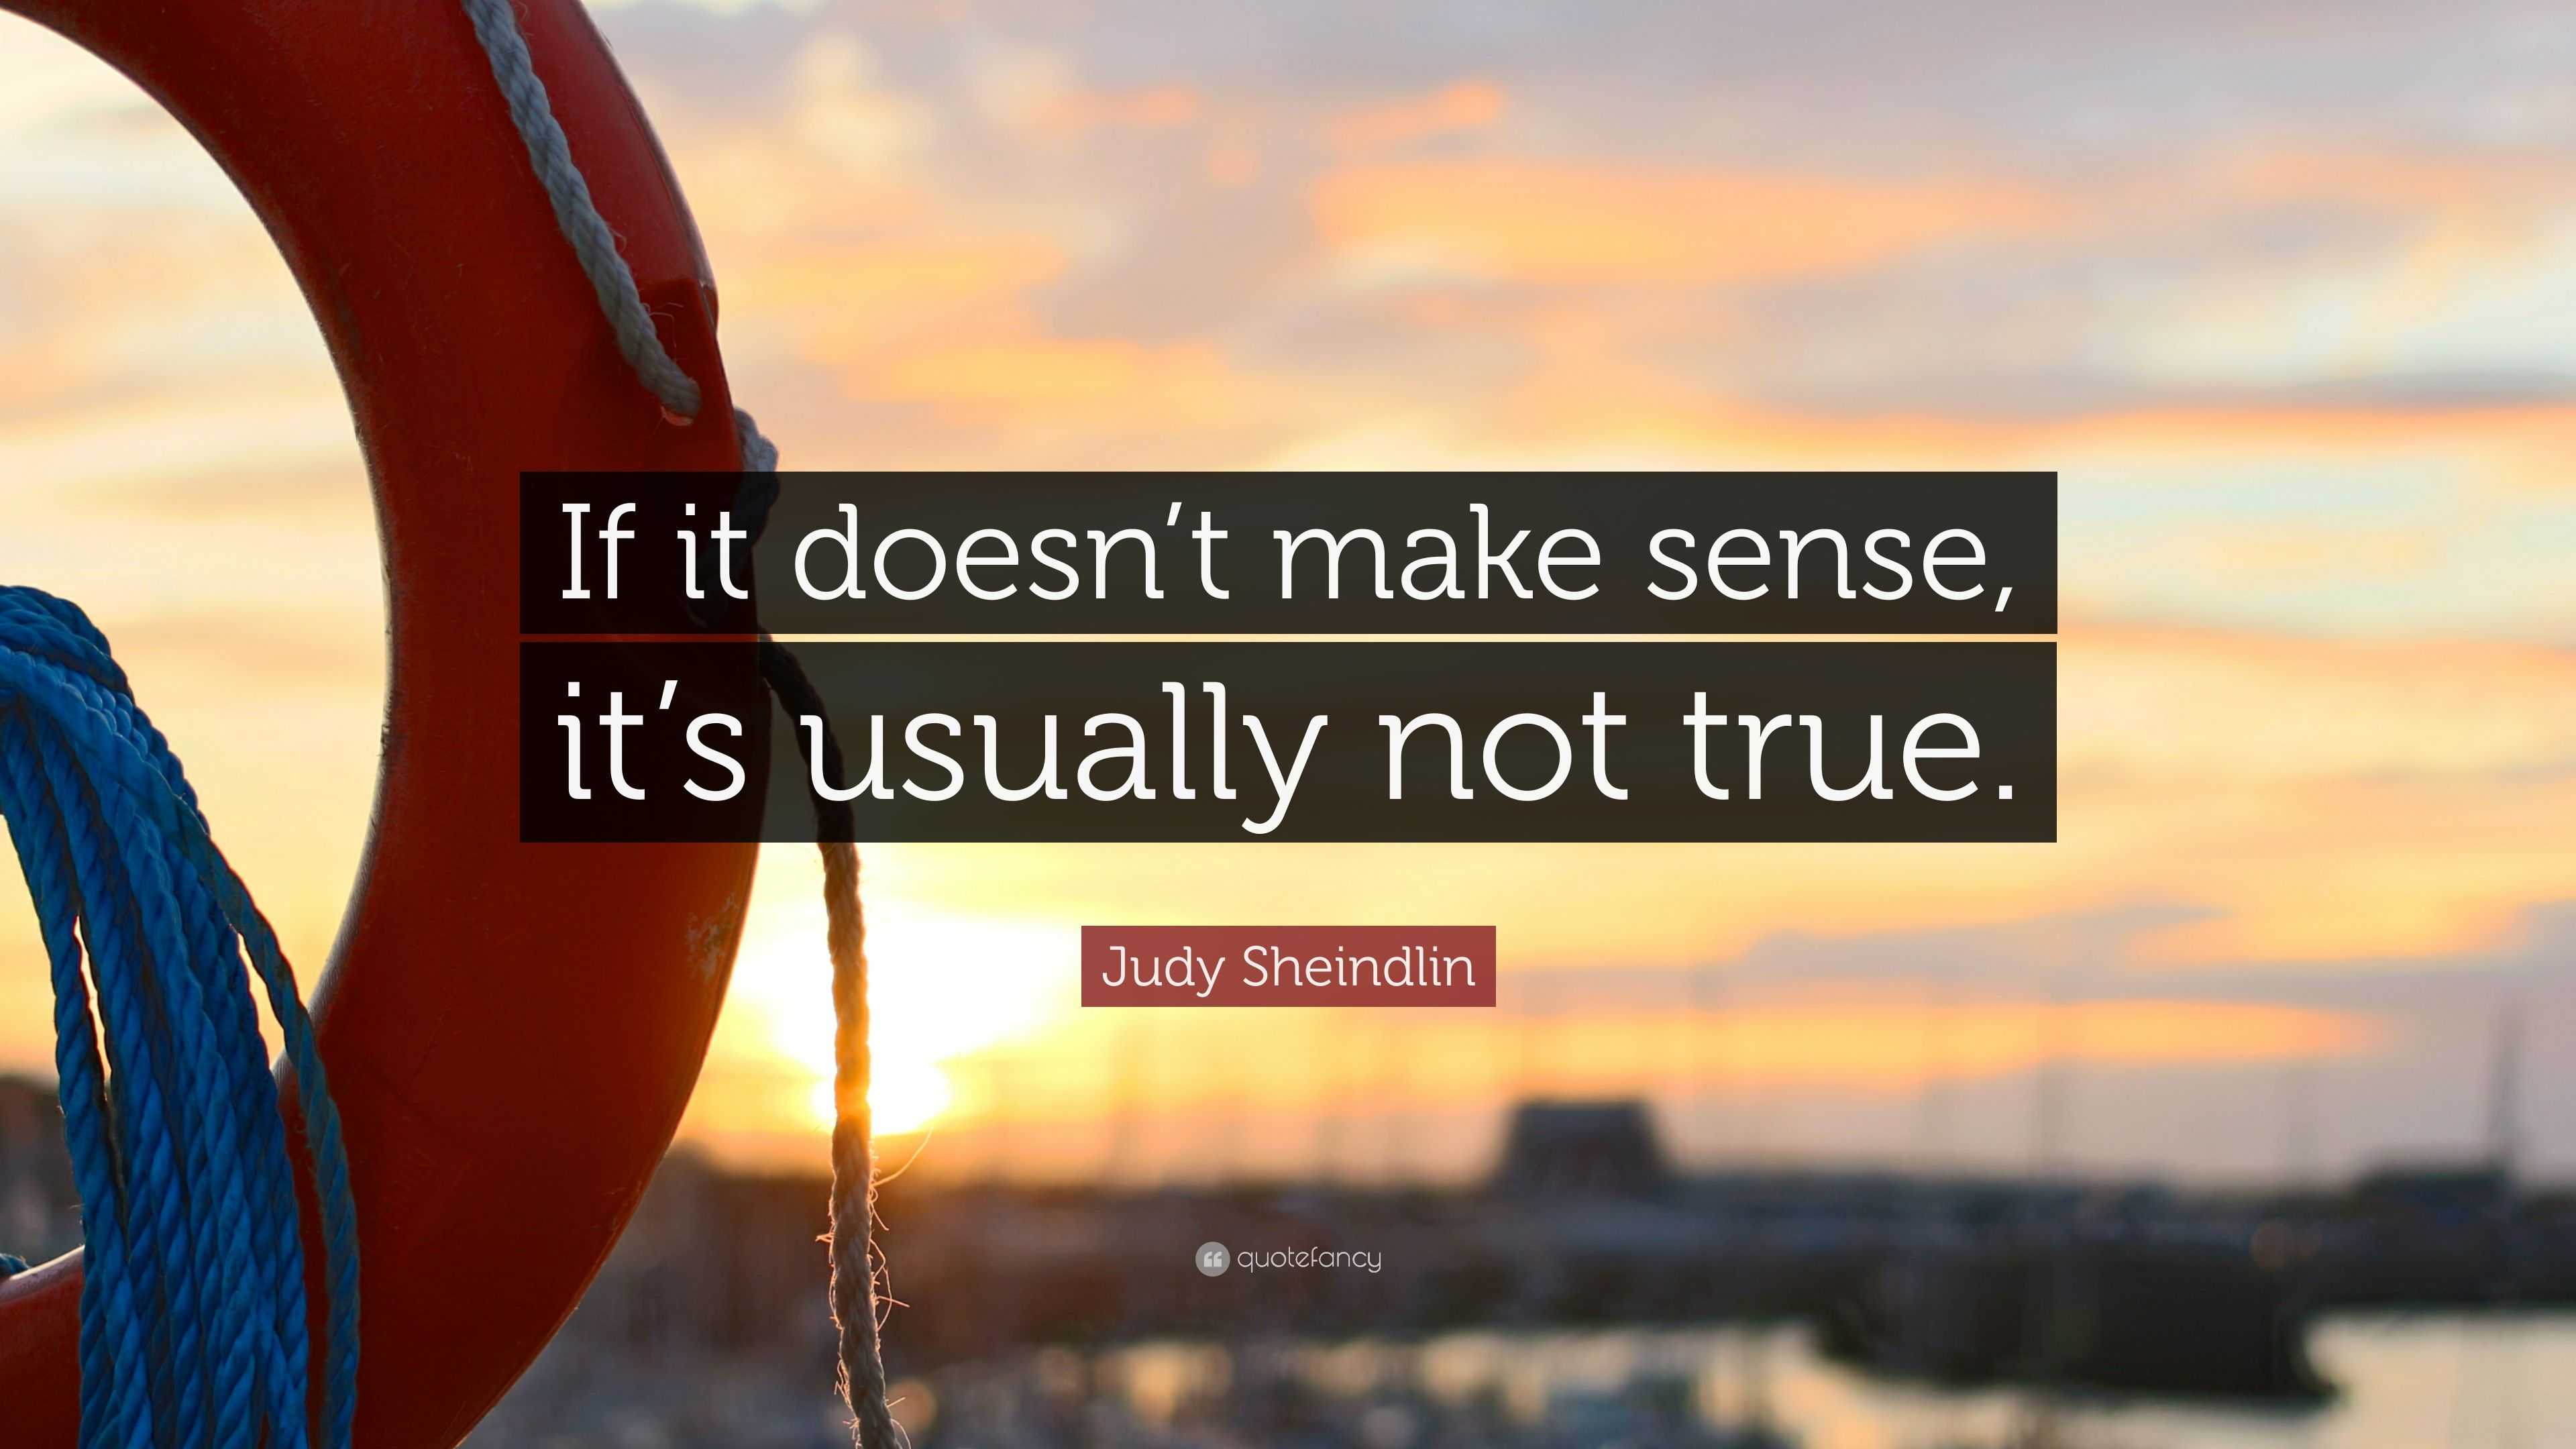 Judy Sheindlin Quote “If it doesn t make sense it s usually not